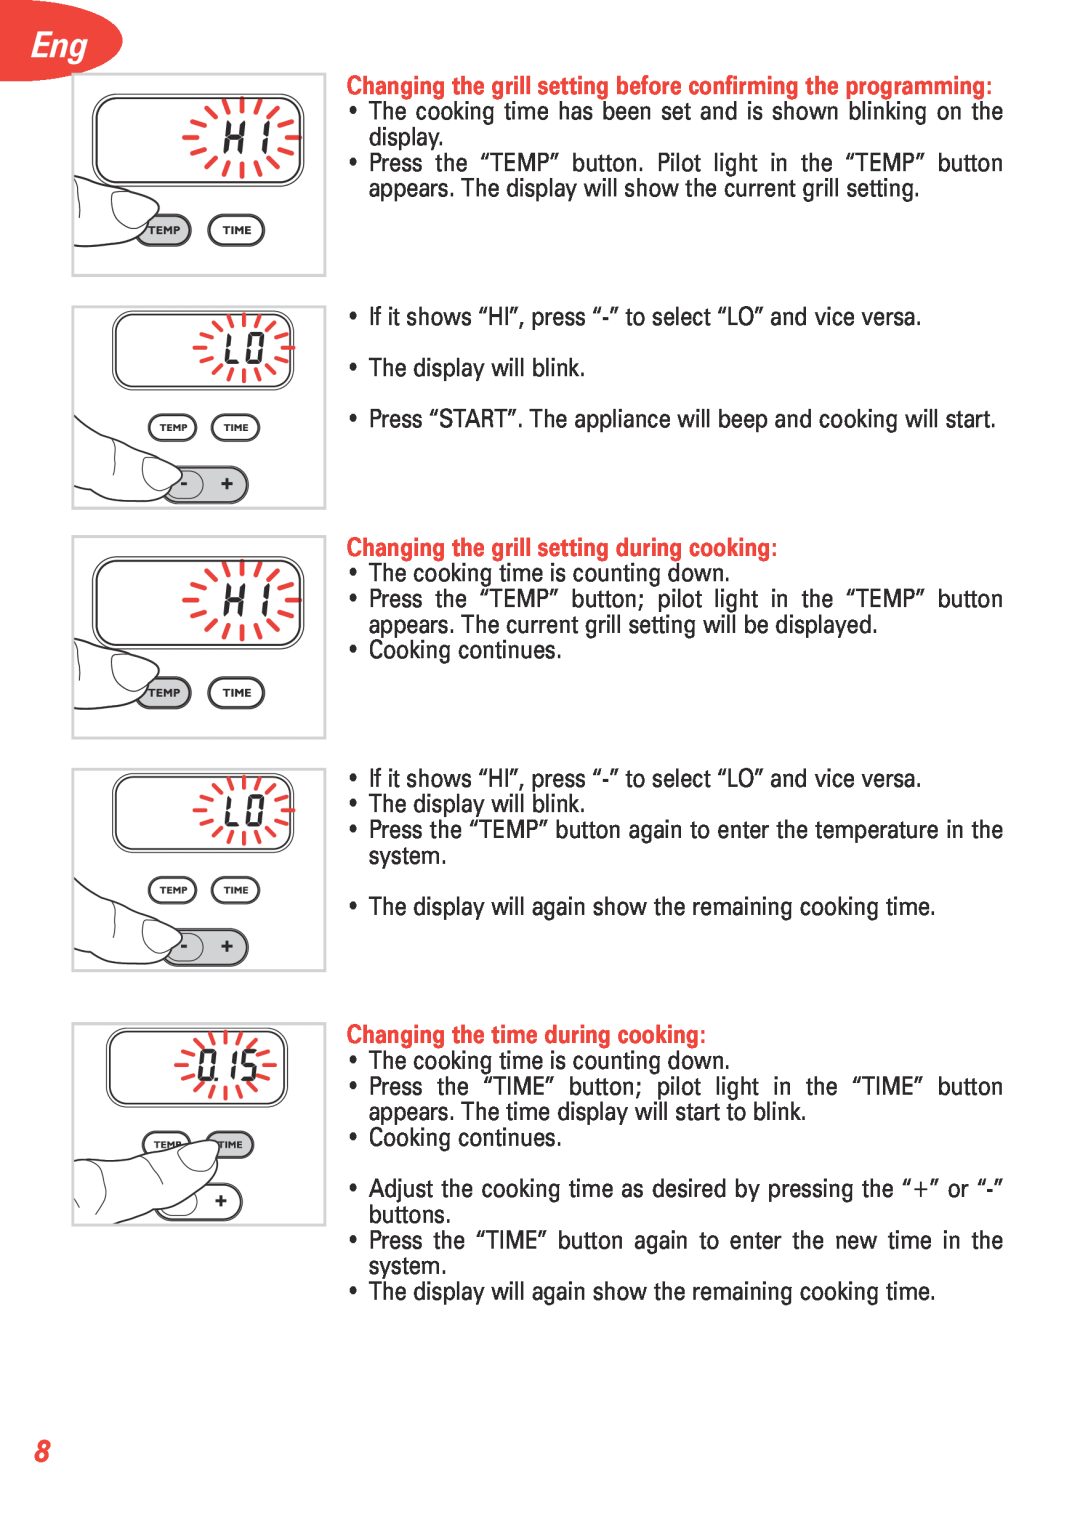 T-Fal 5252 manual Changing the grill setting during cooking, Changing the time during cooking 